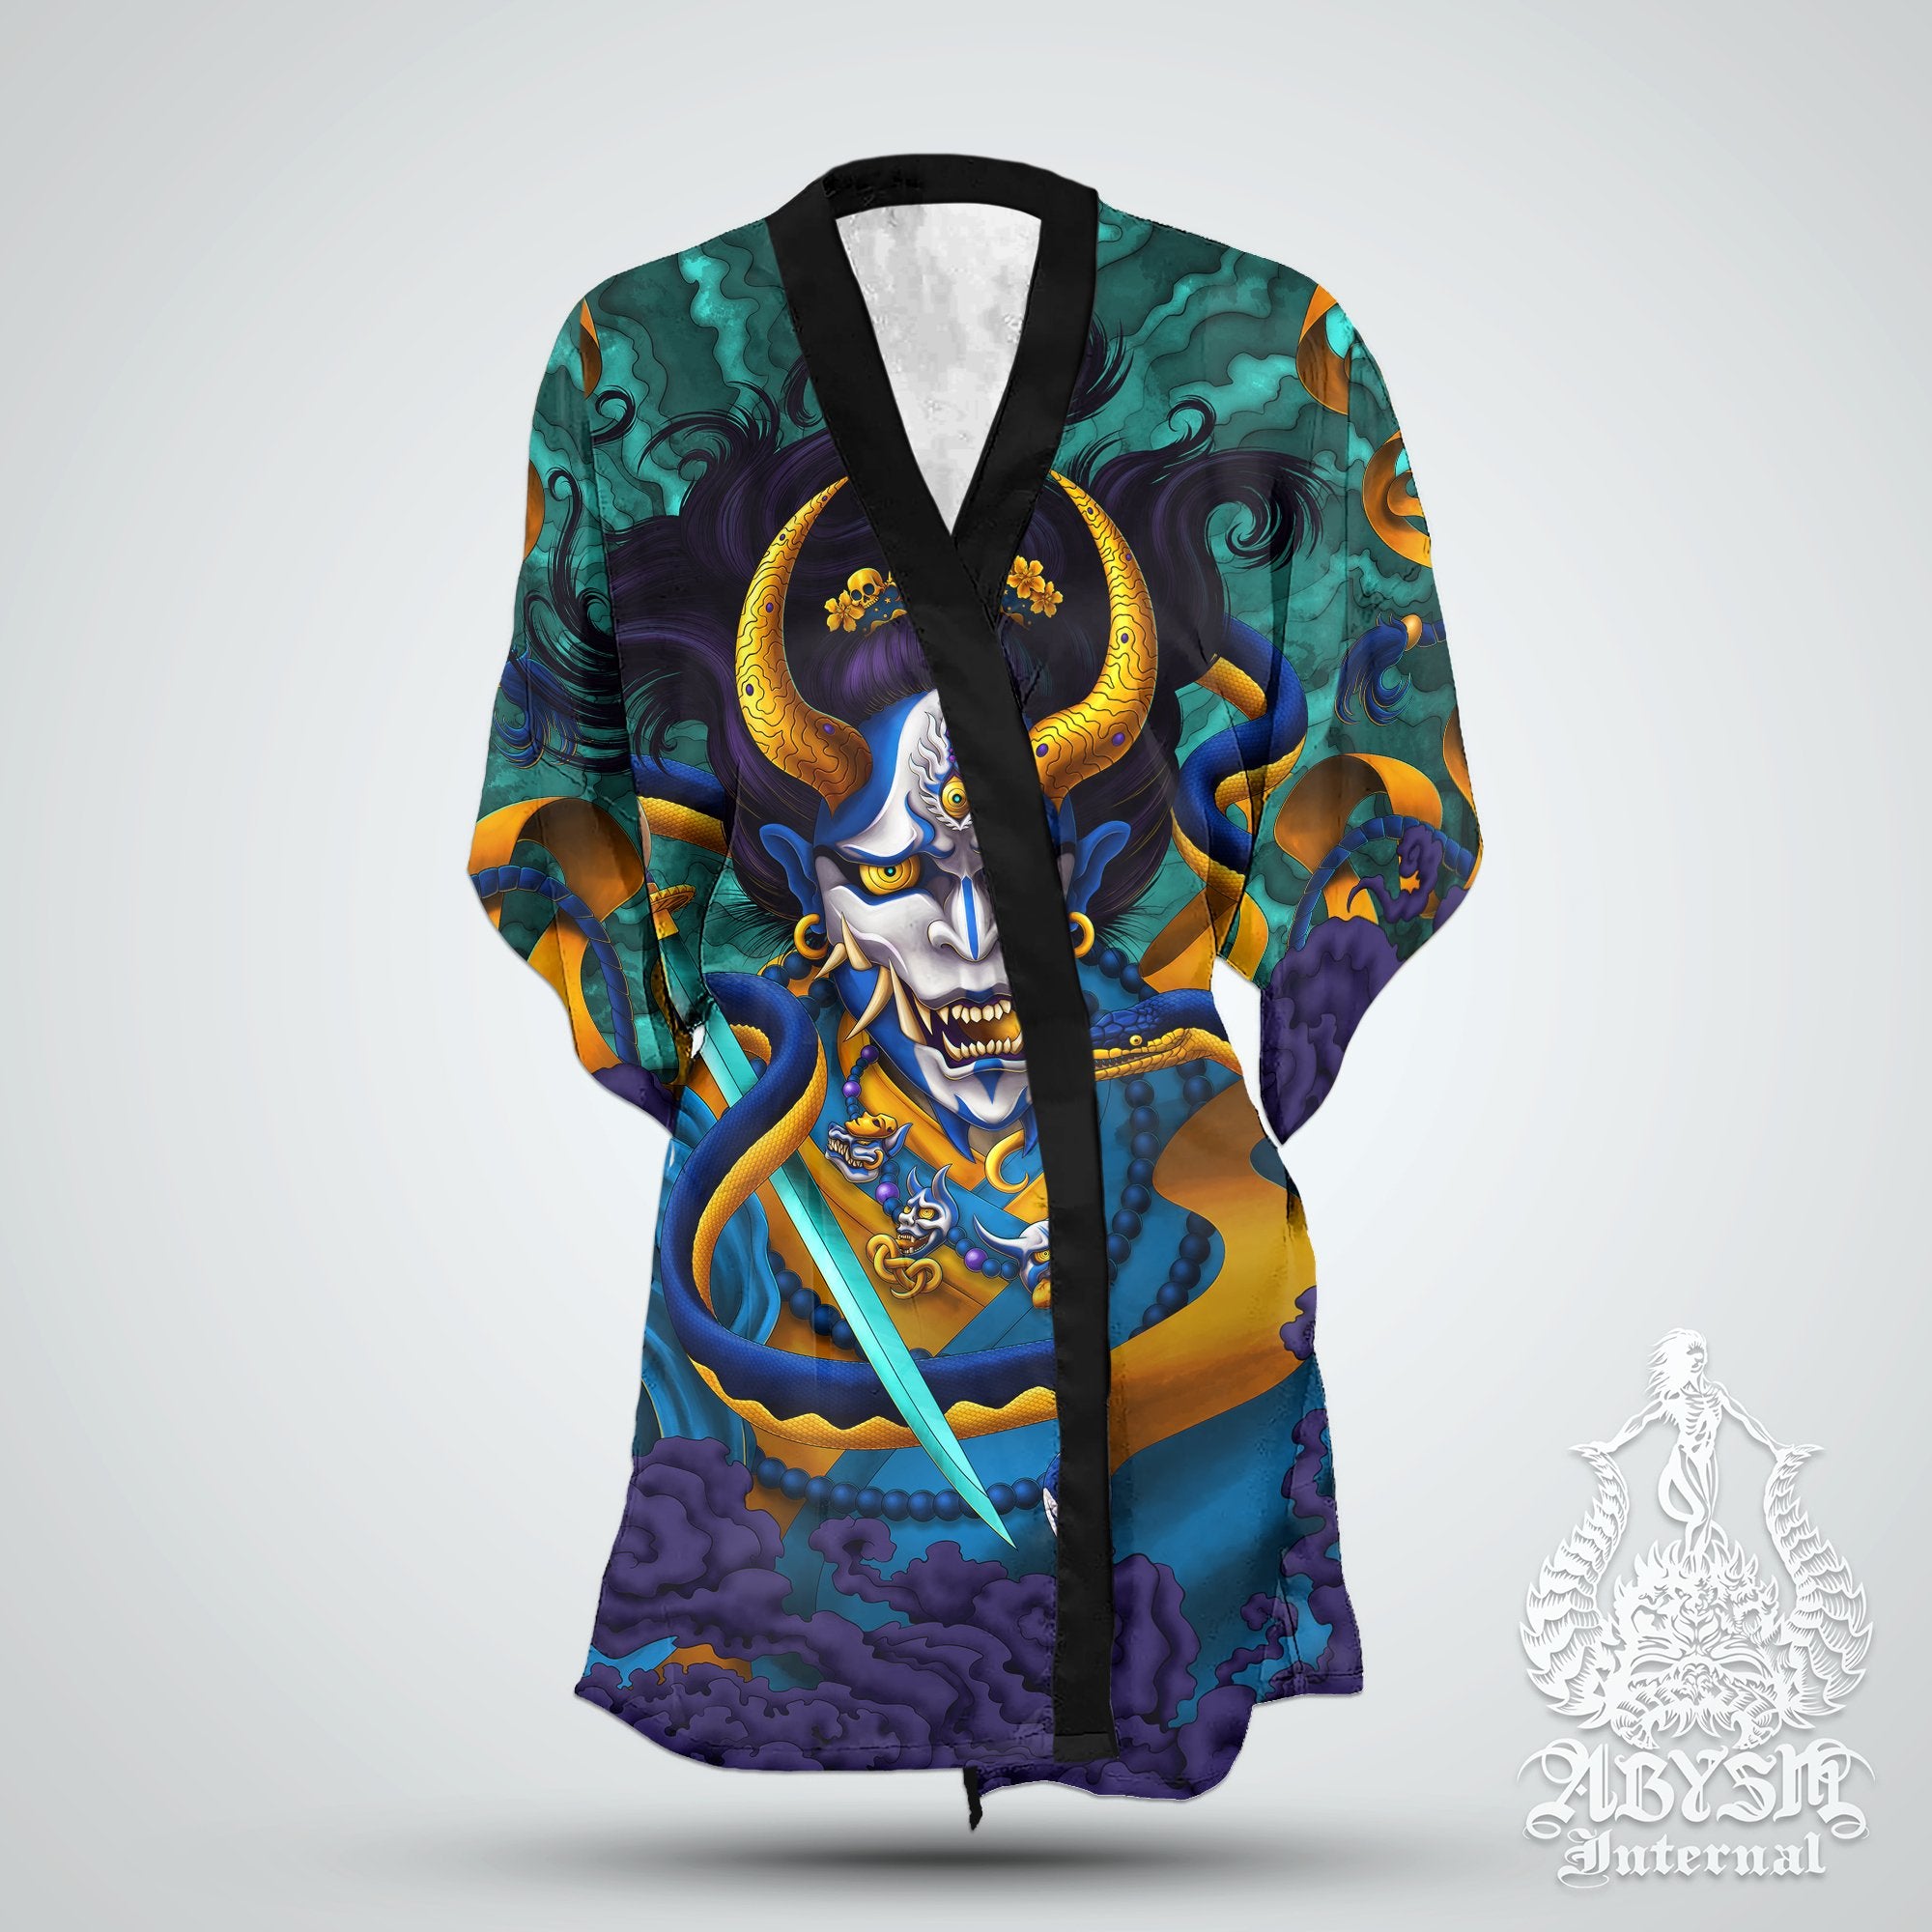 Hannya Short Kimono Robe, Beach Party Outfit, Demon Coverup, Japanese Oni Art, Summer Festival, Indie Clothing, Unisex - Snake, Cyan and Gold - Abysm Internal